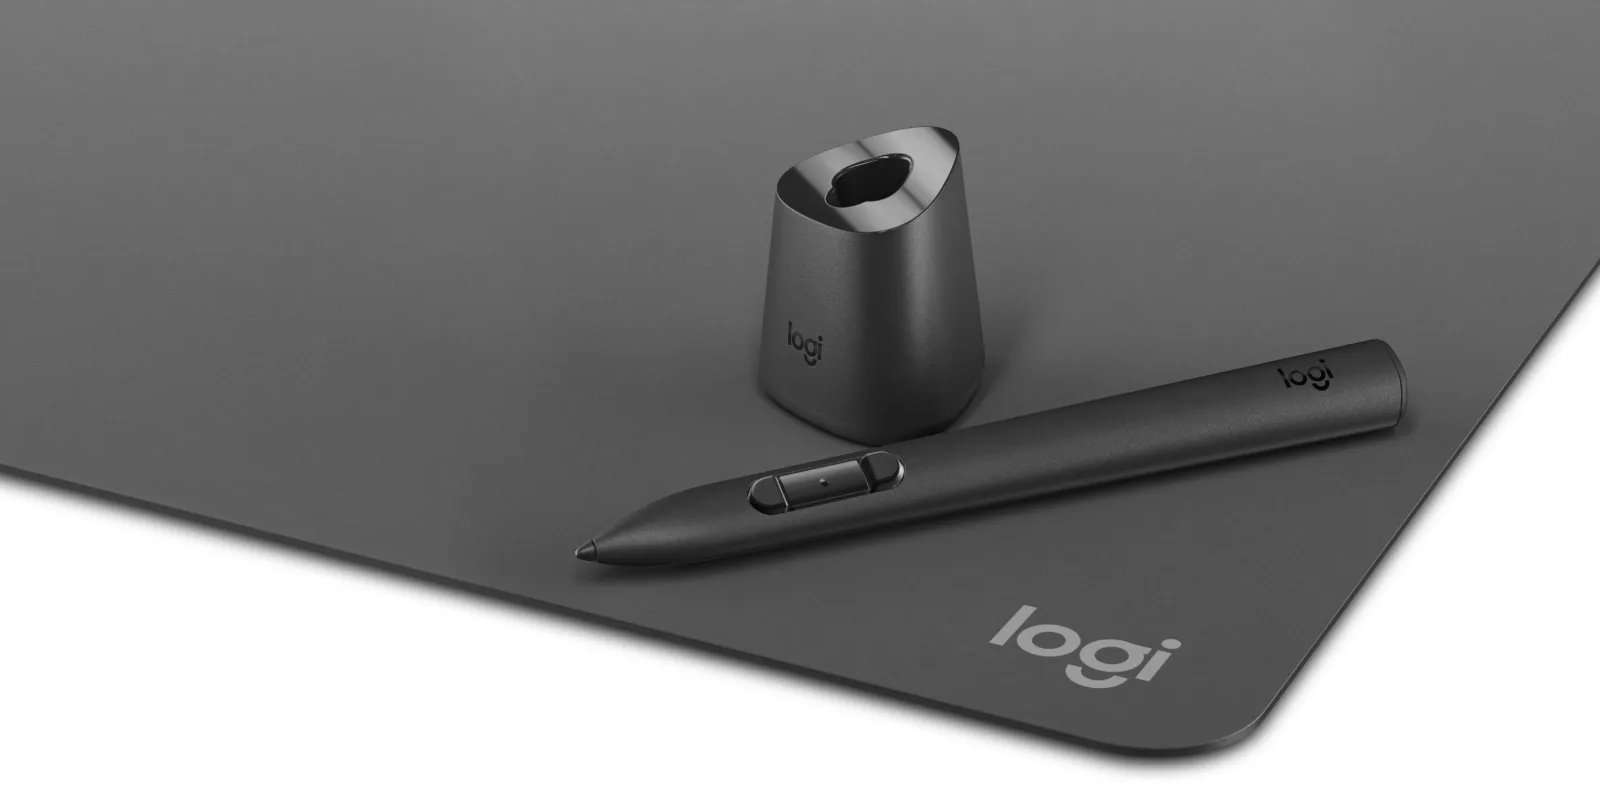 Logitech launches a mixed reality pen for the Meta Quest headset